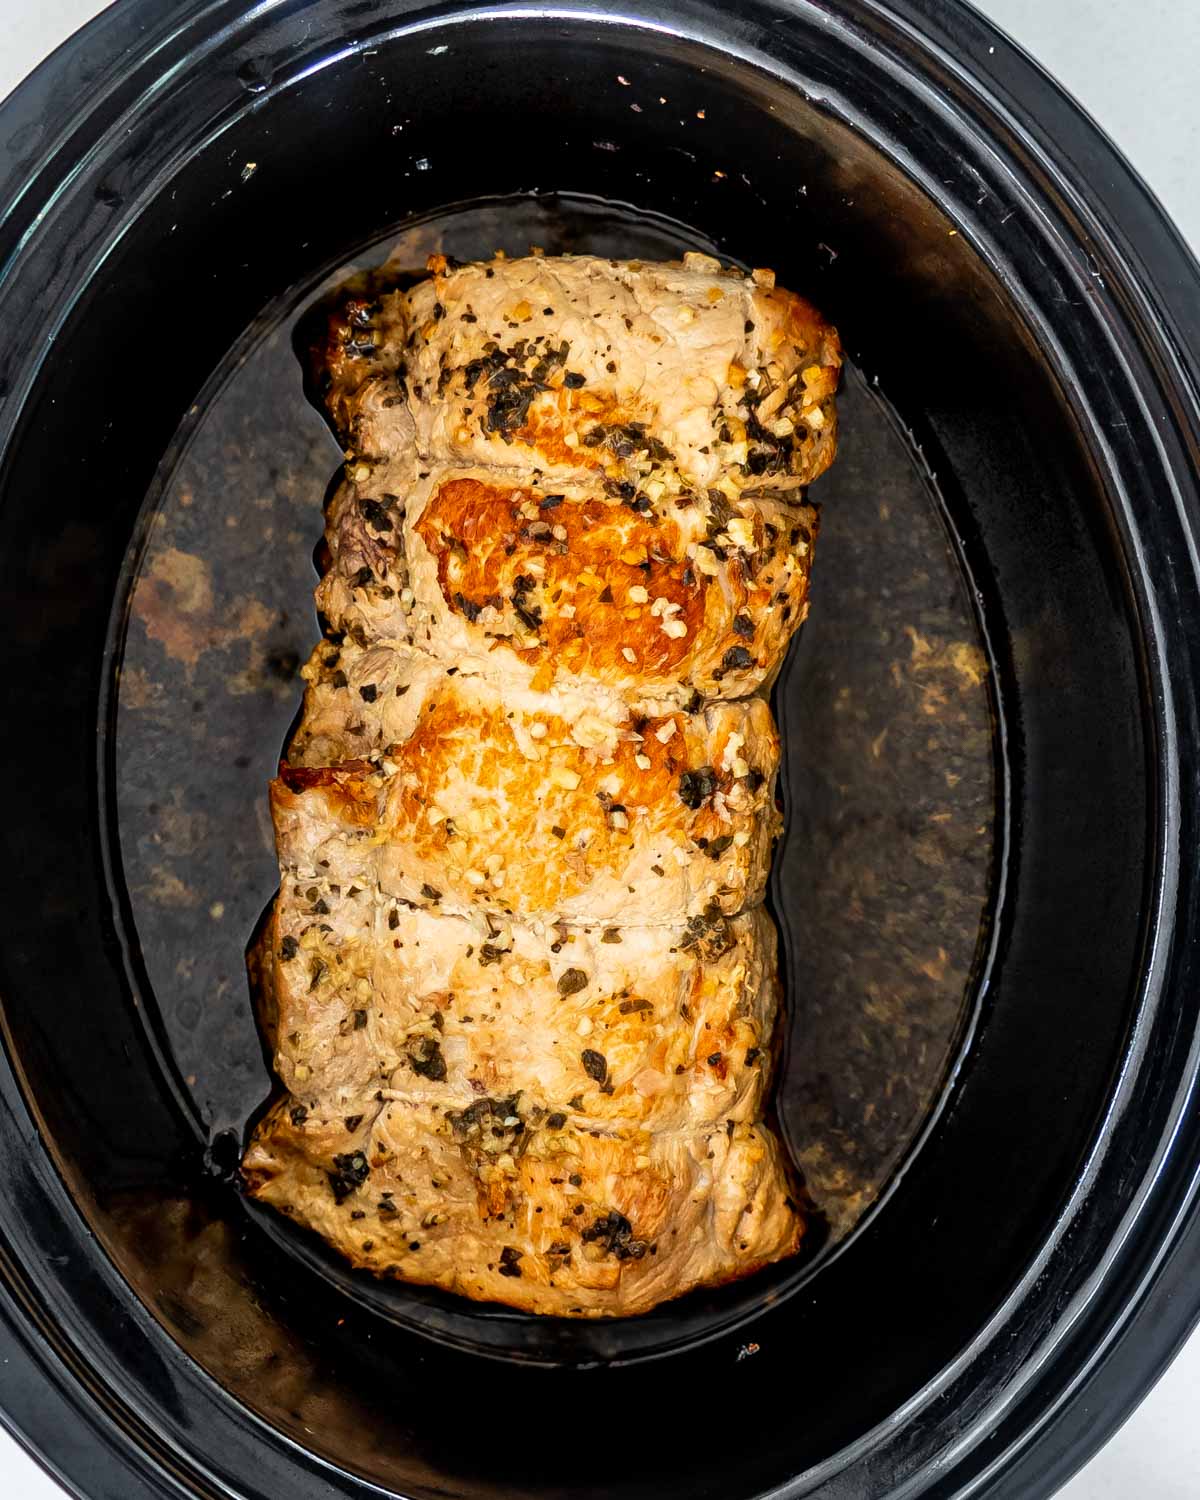 pork loin roasted in a cooking pot.